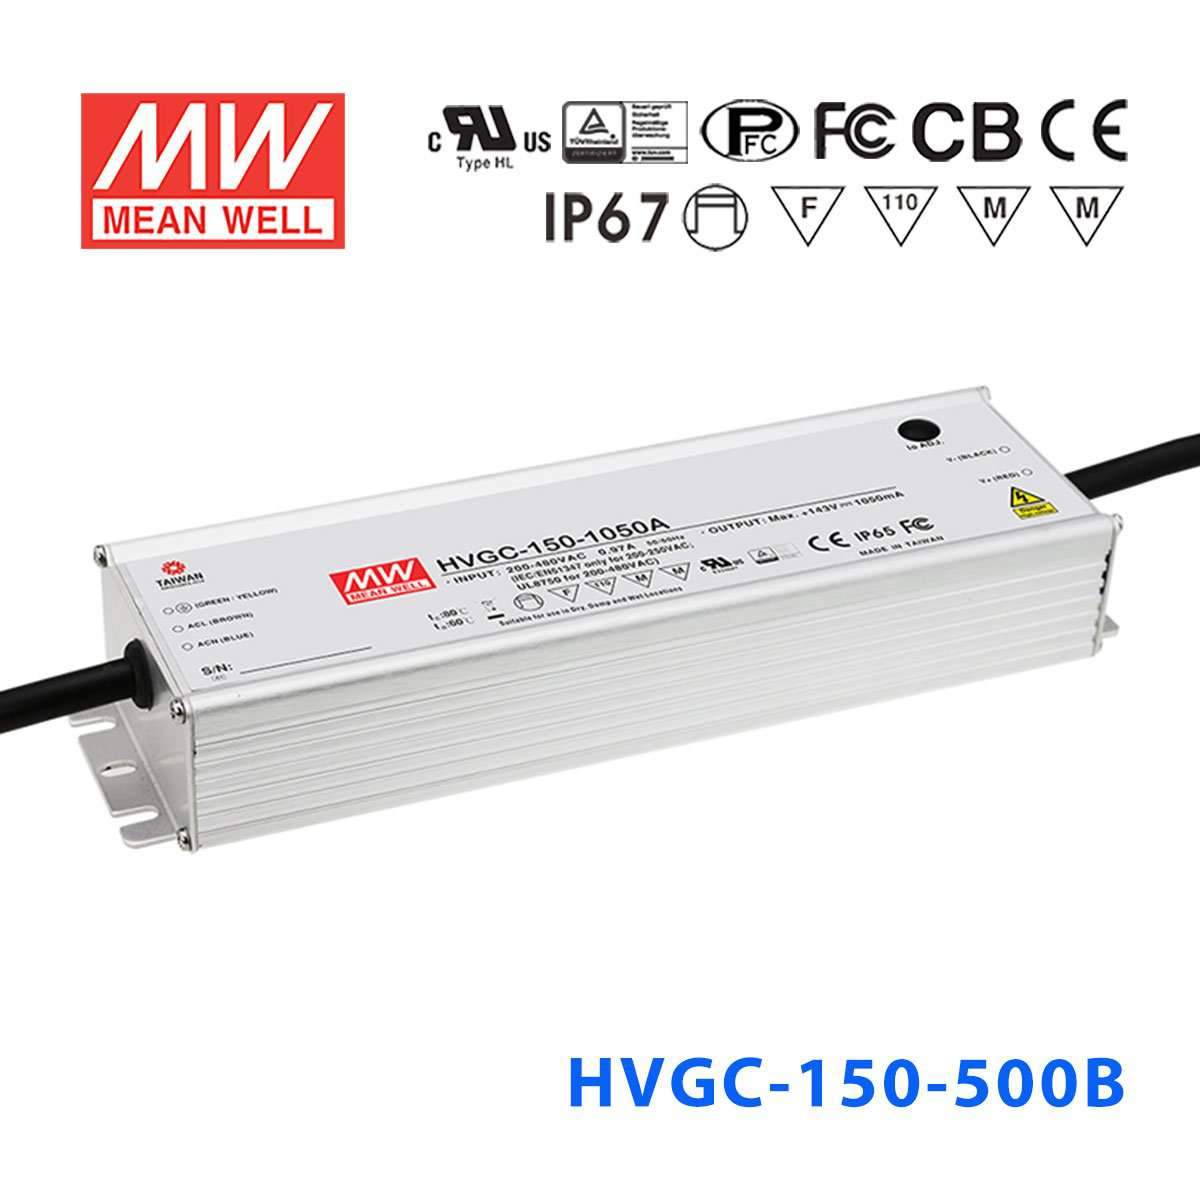 Mean Well HVGC-150-500B Power Supply 150W 500mA - Dimmable